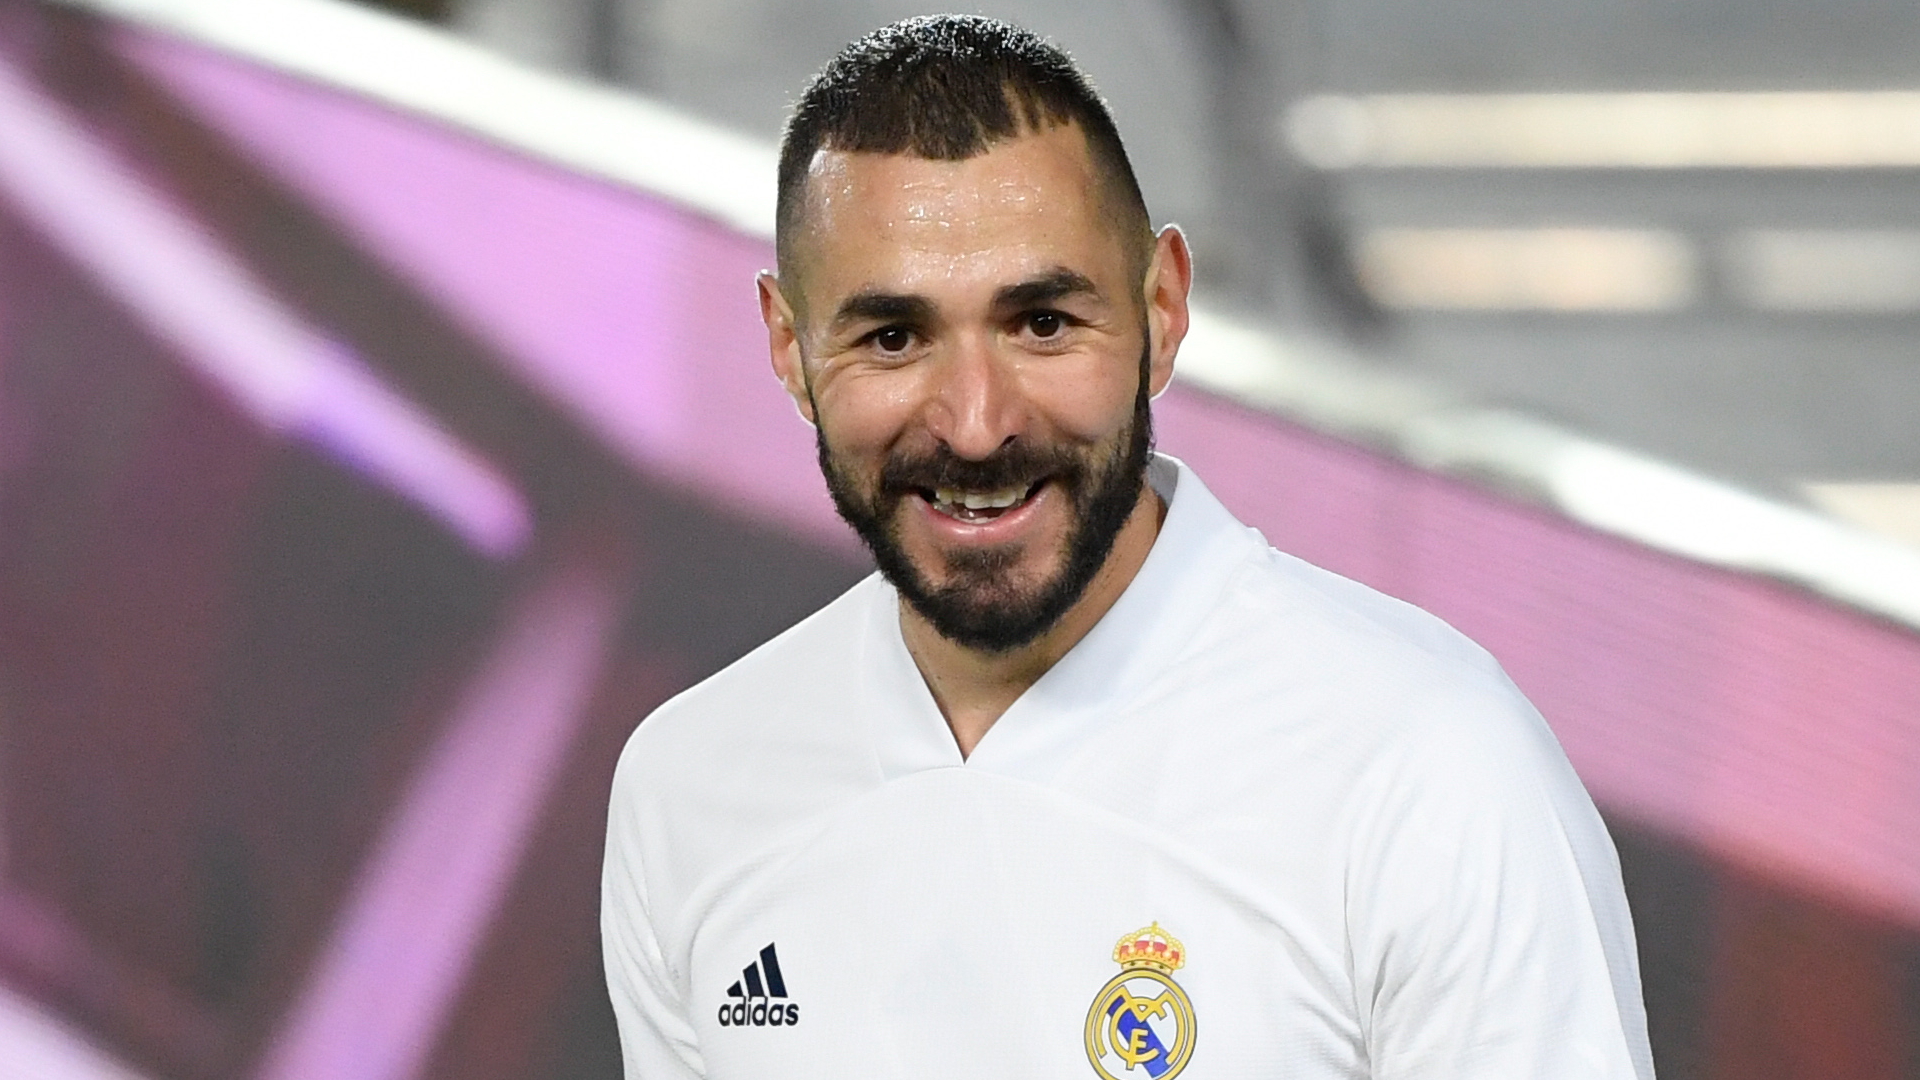 'He's not tired' - Zidane defends Benzema after poor performance in Real Madrid win